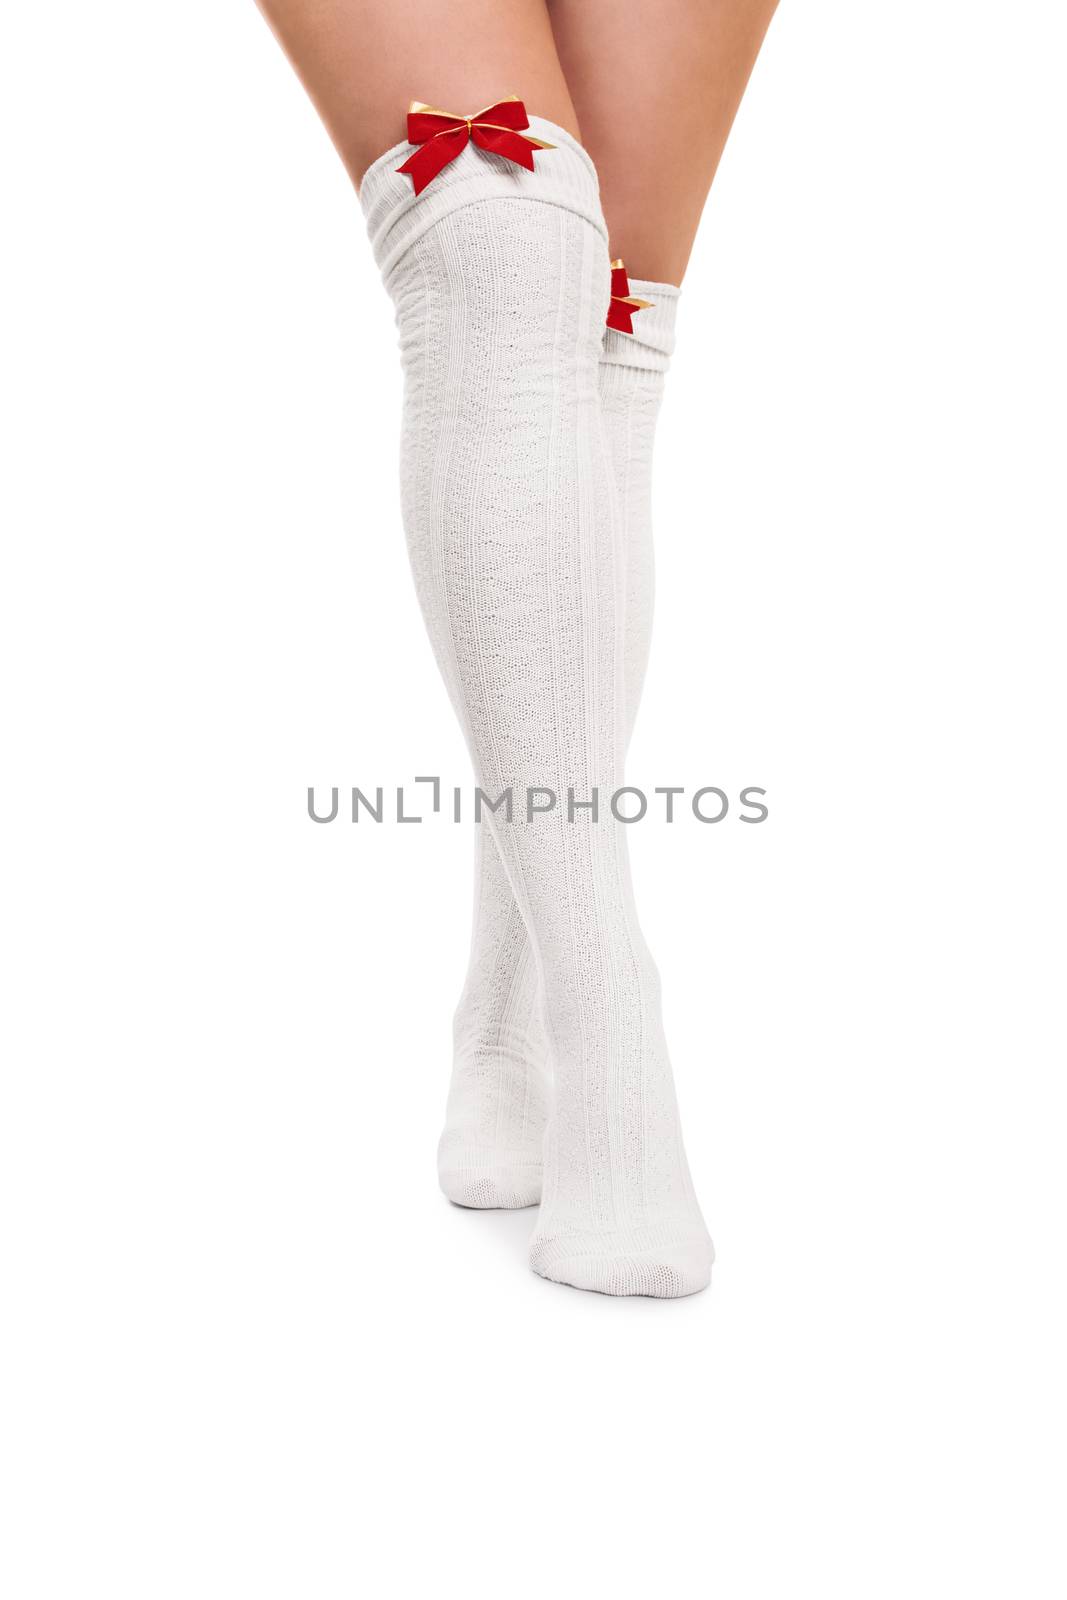 Female legs in white stockings with red bow ties, isolated on white background.